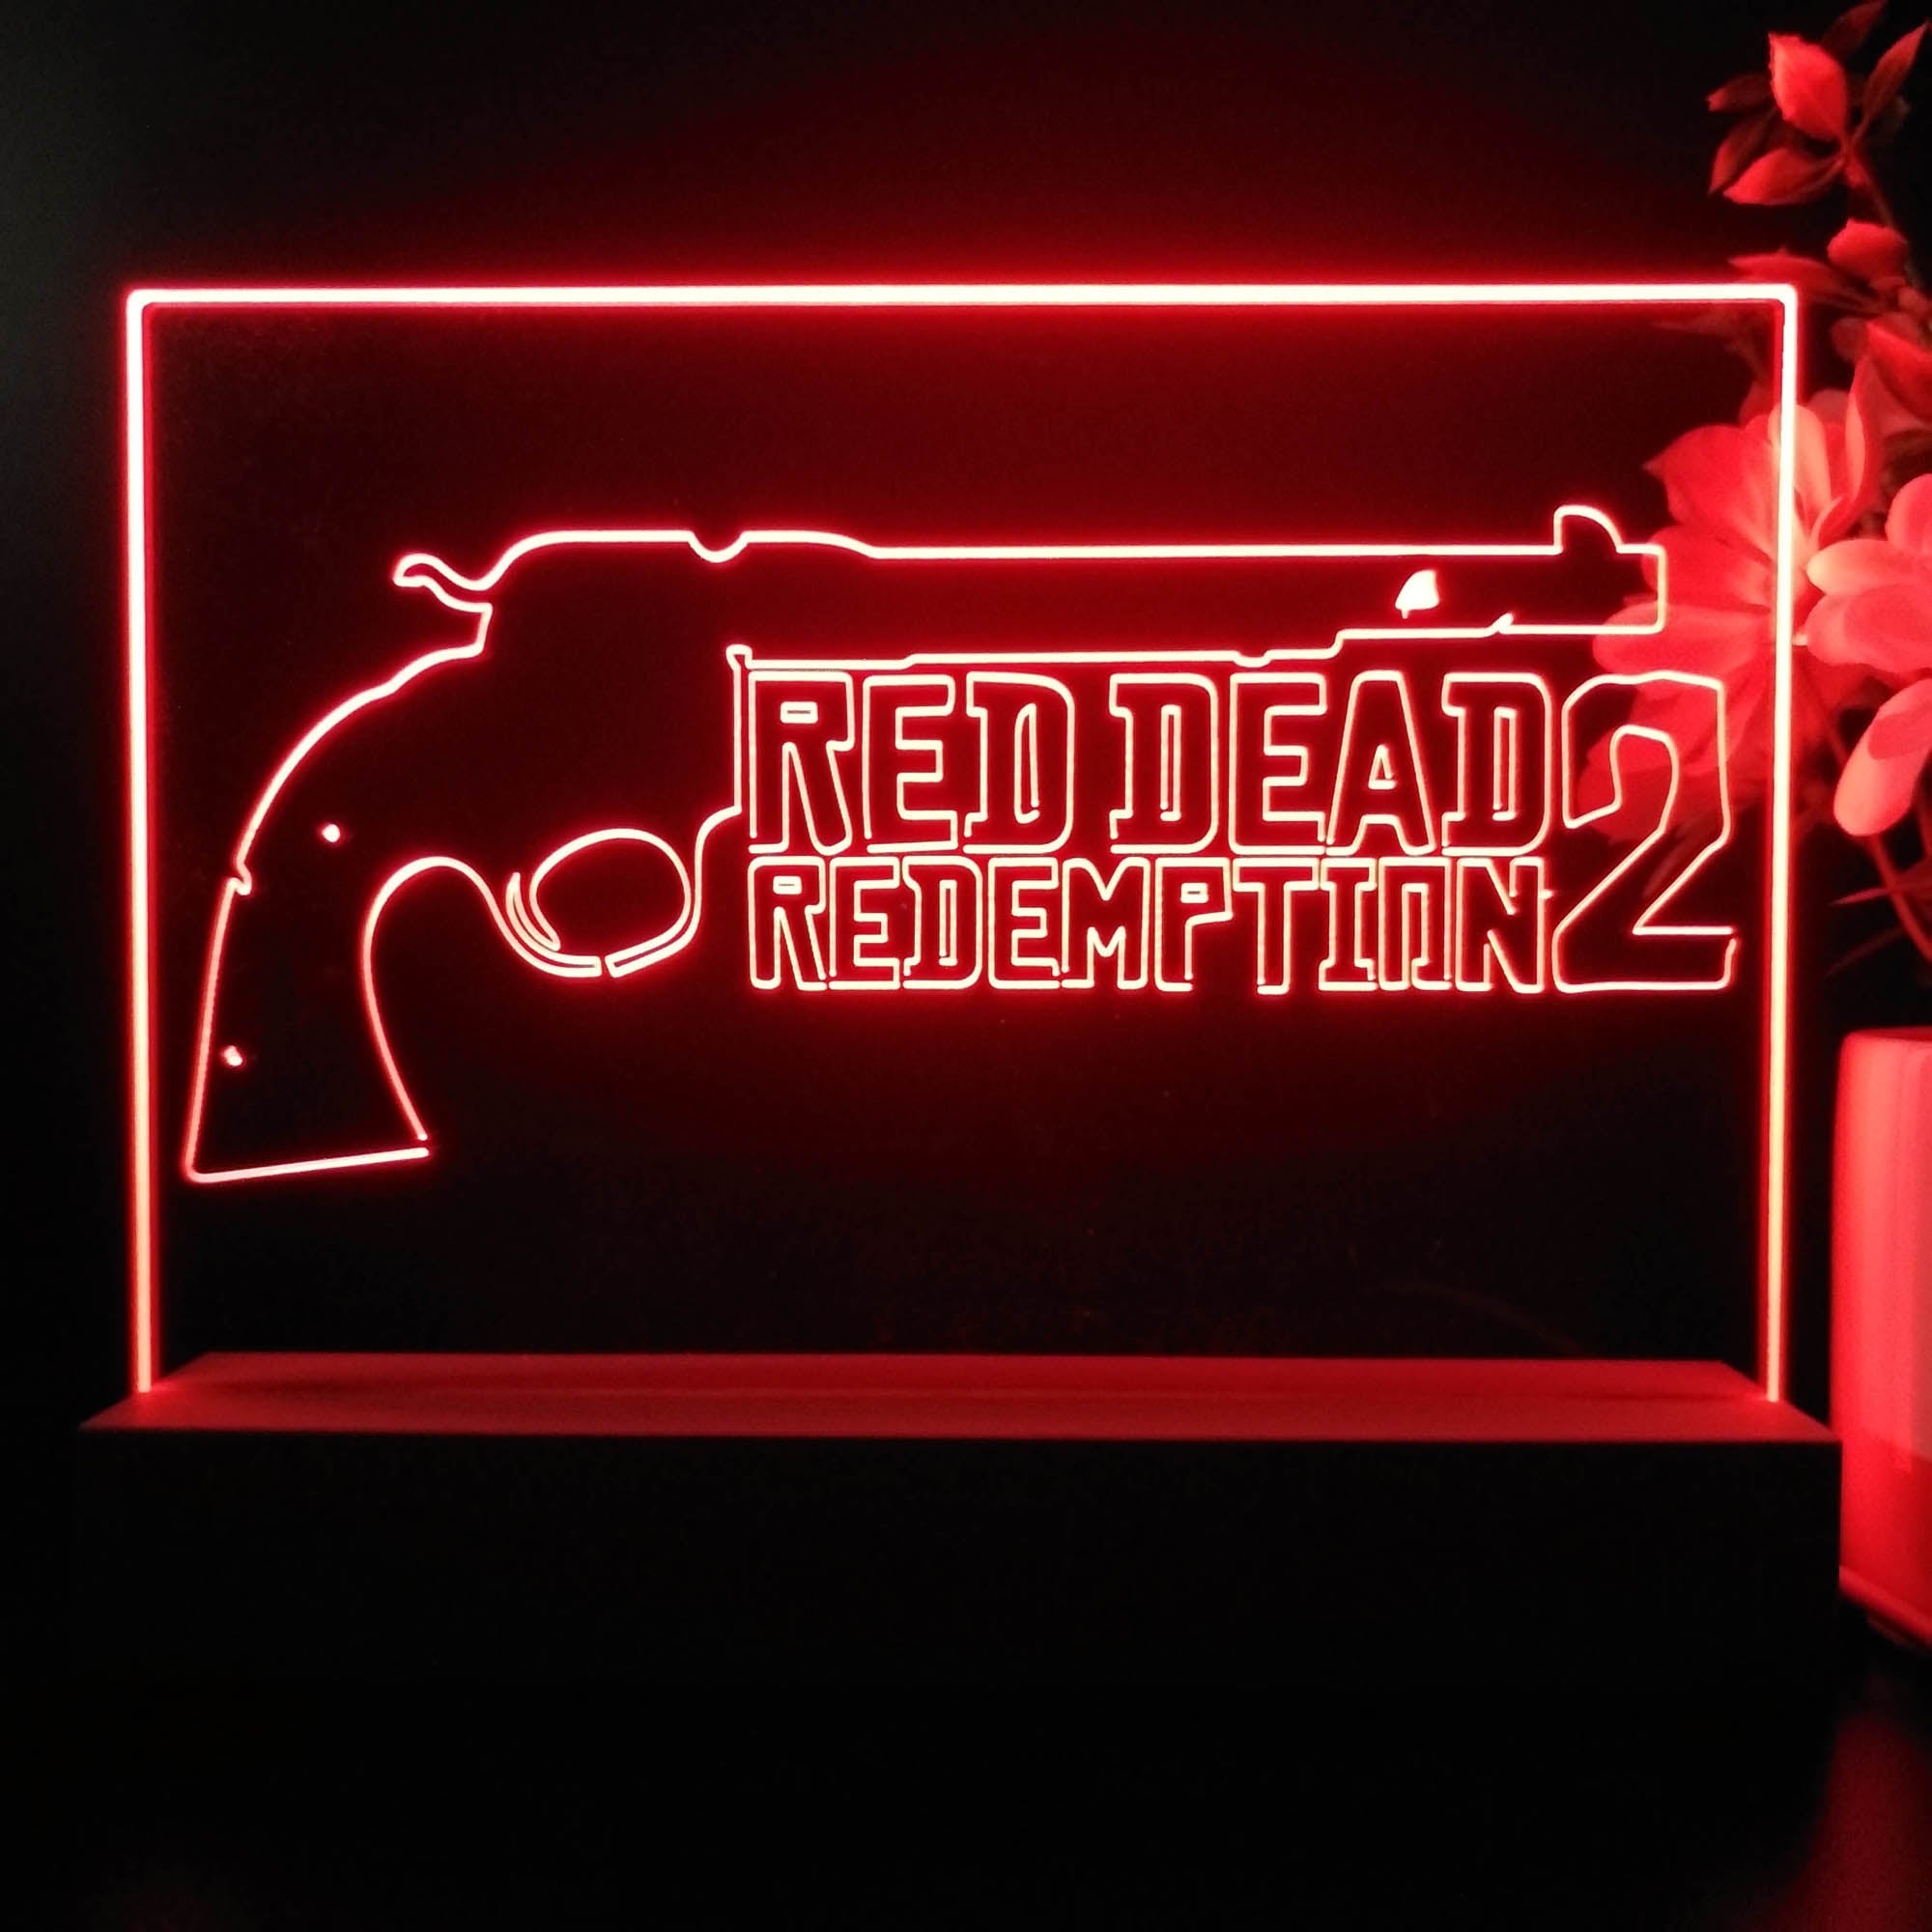 Red Dead Redemption Neon Sign Game Room Lamp